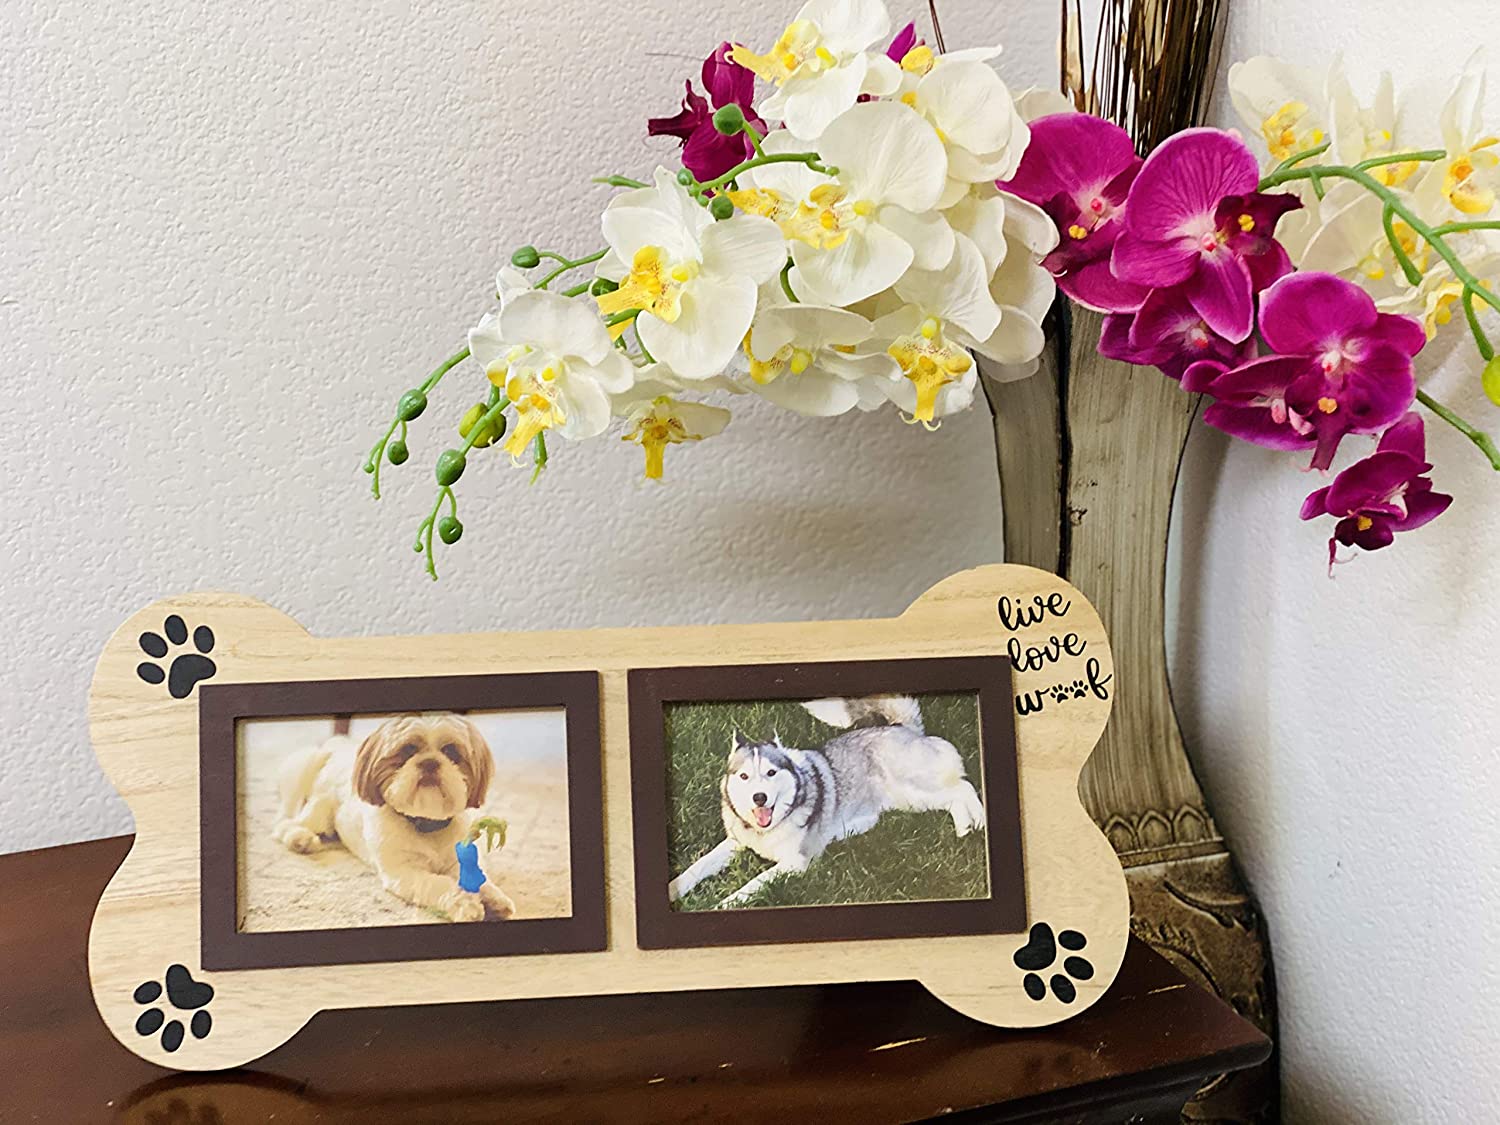 Dog Picture Frame Live Love Woof Pet Memorial Gifts for Dogs. Brown Dog Bone Shaped Wooden Picture Frames Collage 4x6. - image 1 of 3